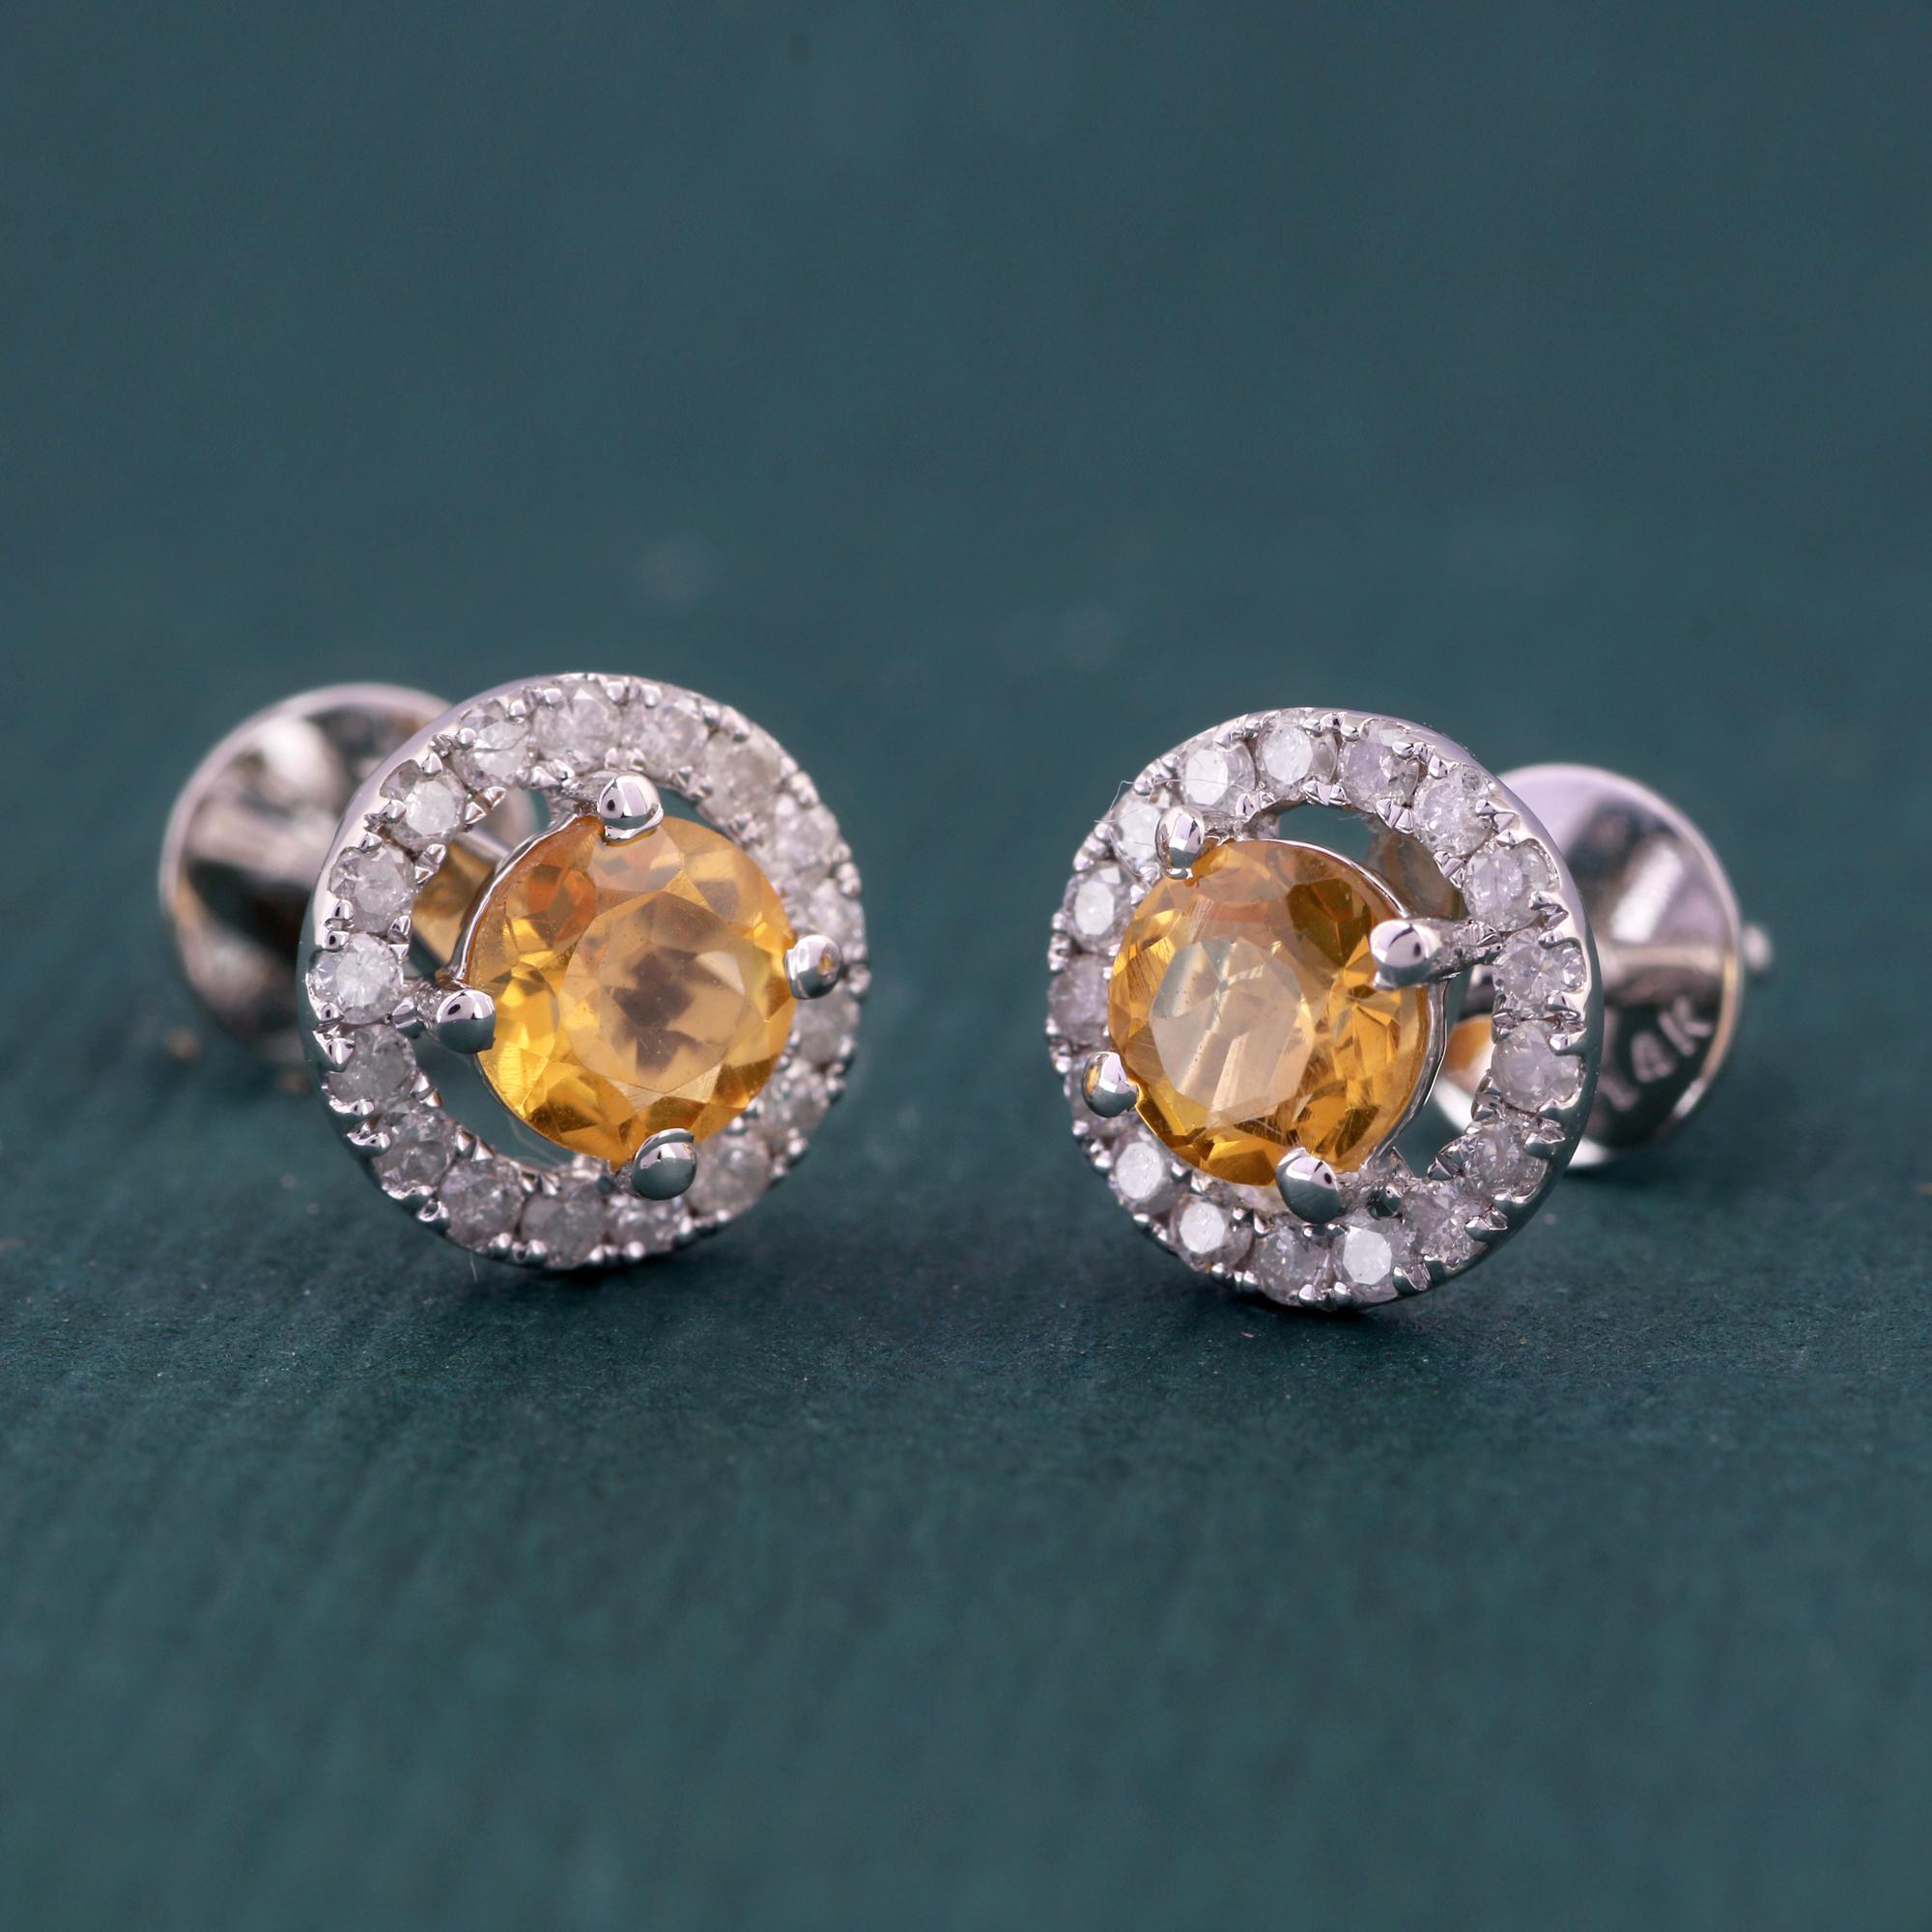 Brilliant Cut 14K White Gold 0.335 Ctw Diamond, 0.762 Ctw Natural Citrine Round Stud Earrings For Sale